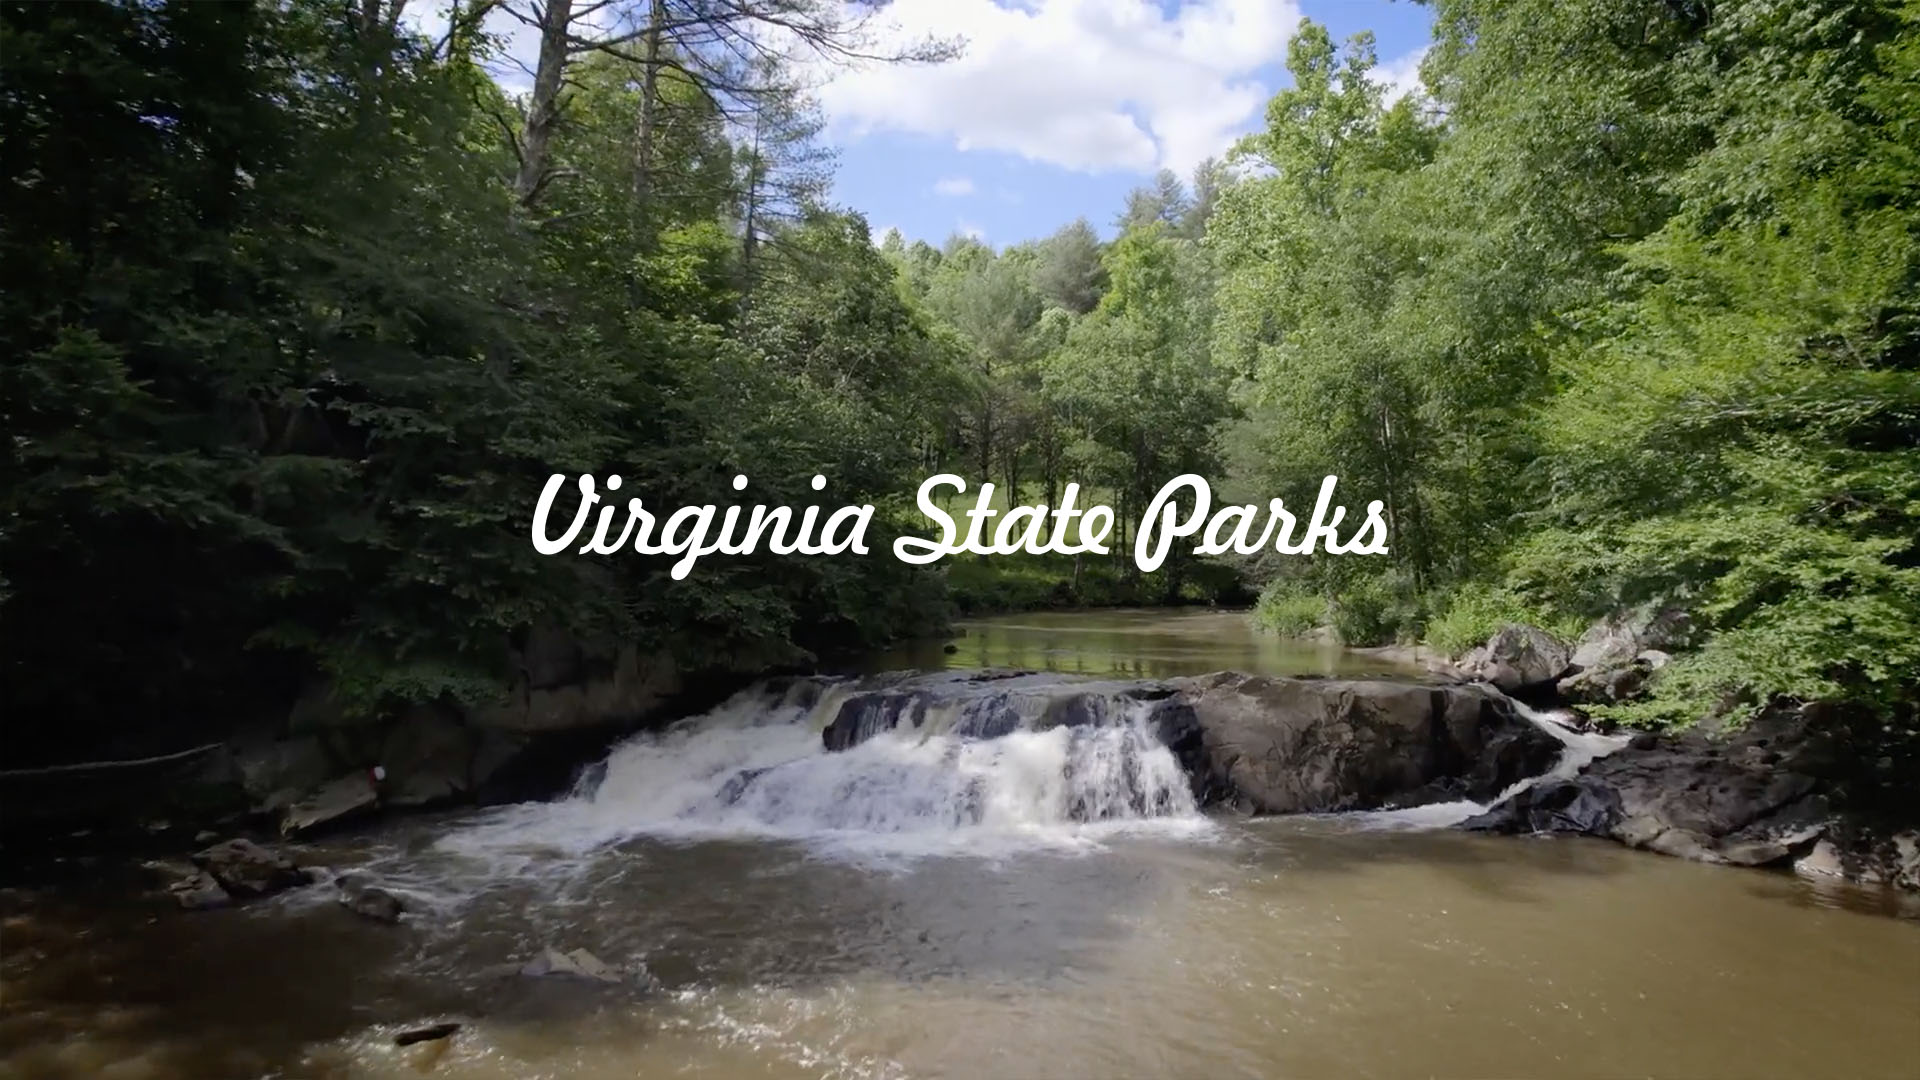 Virginia State Parks Logo and Scene